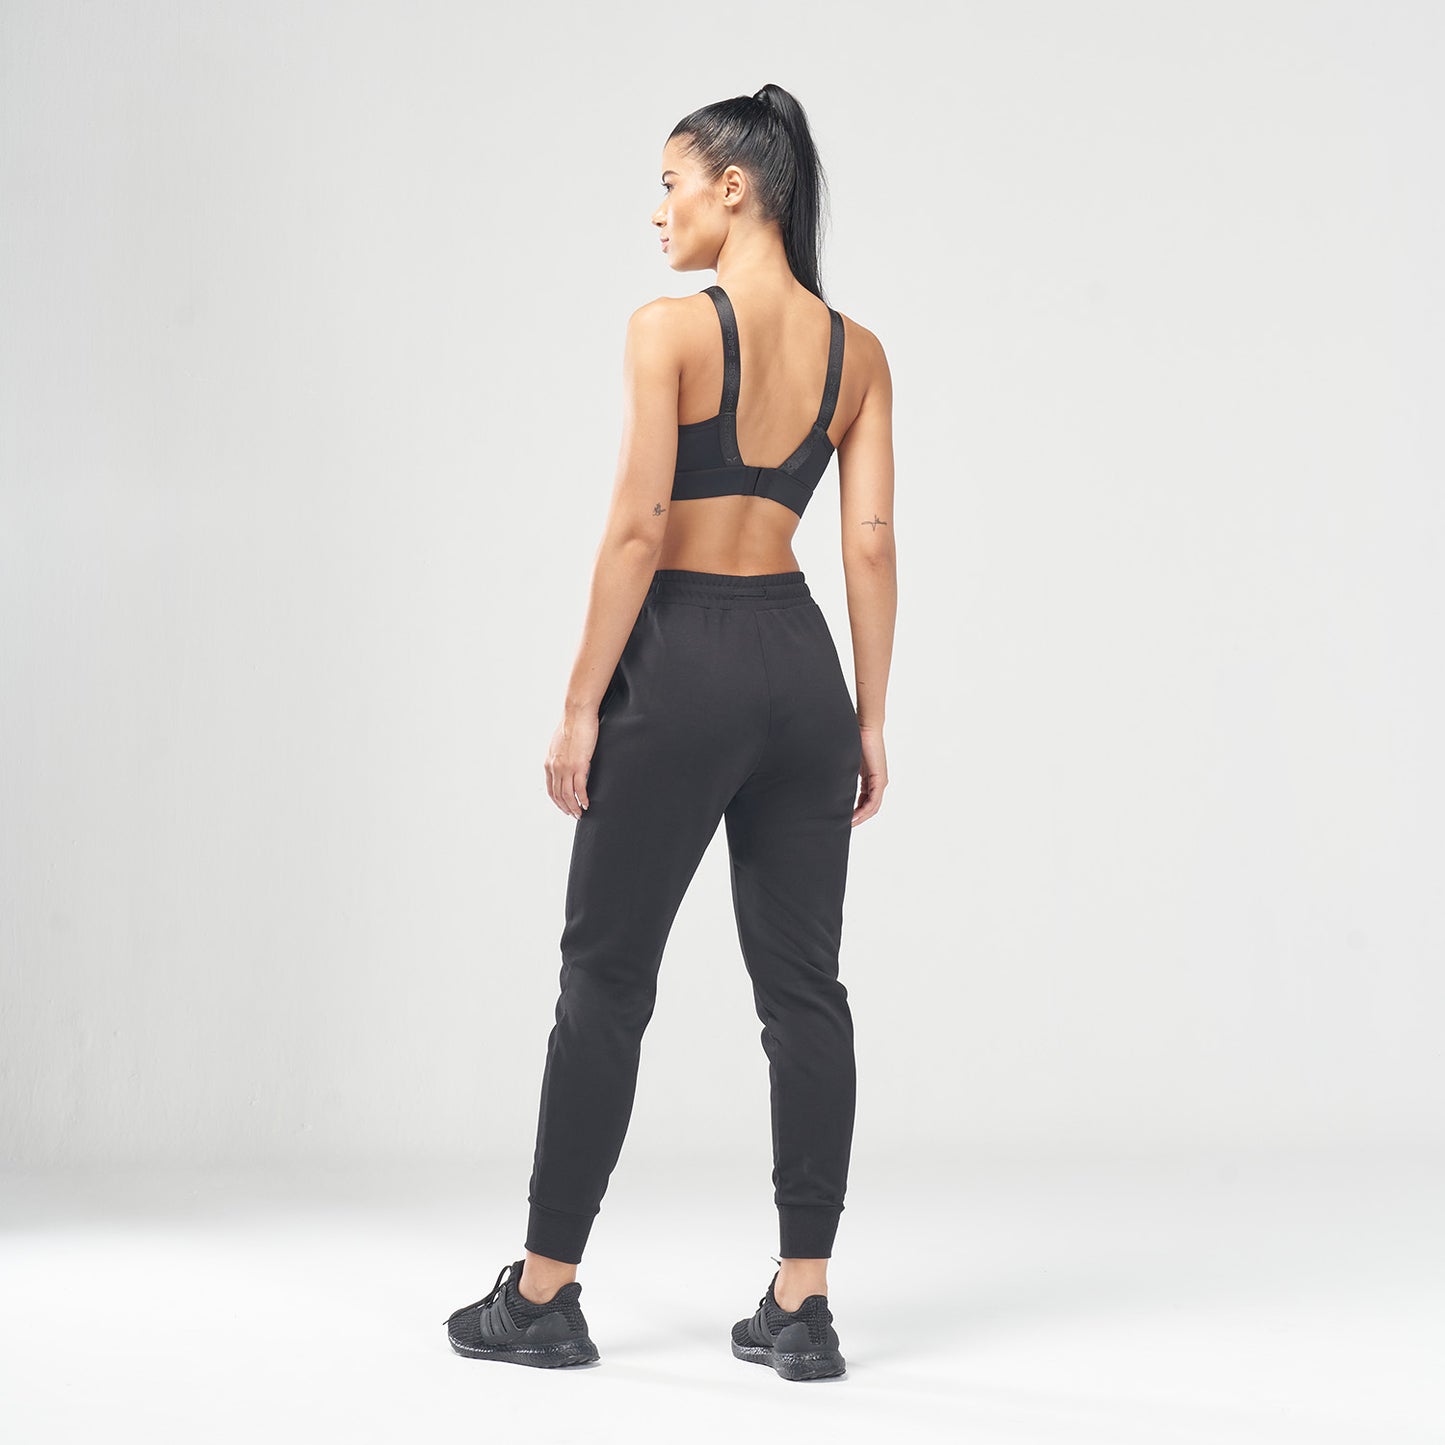 squatwolf-workout-clothes-code-relaxed-joggers-black-gym-pants-for-women